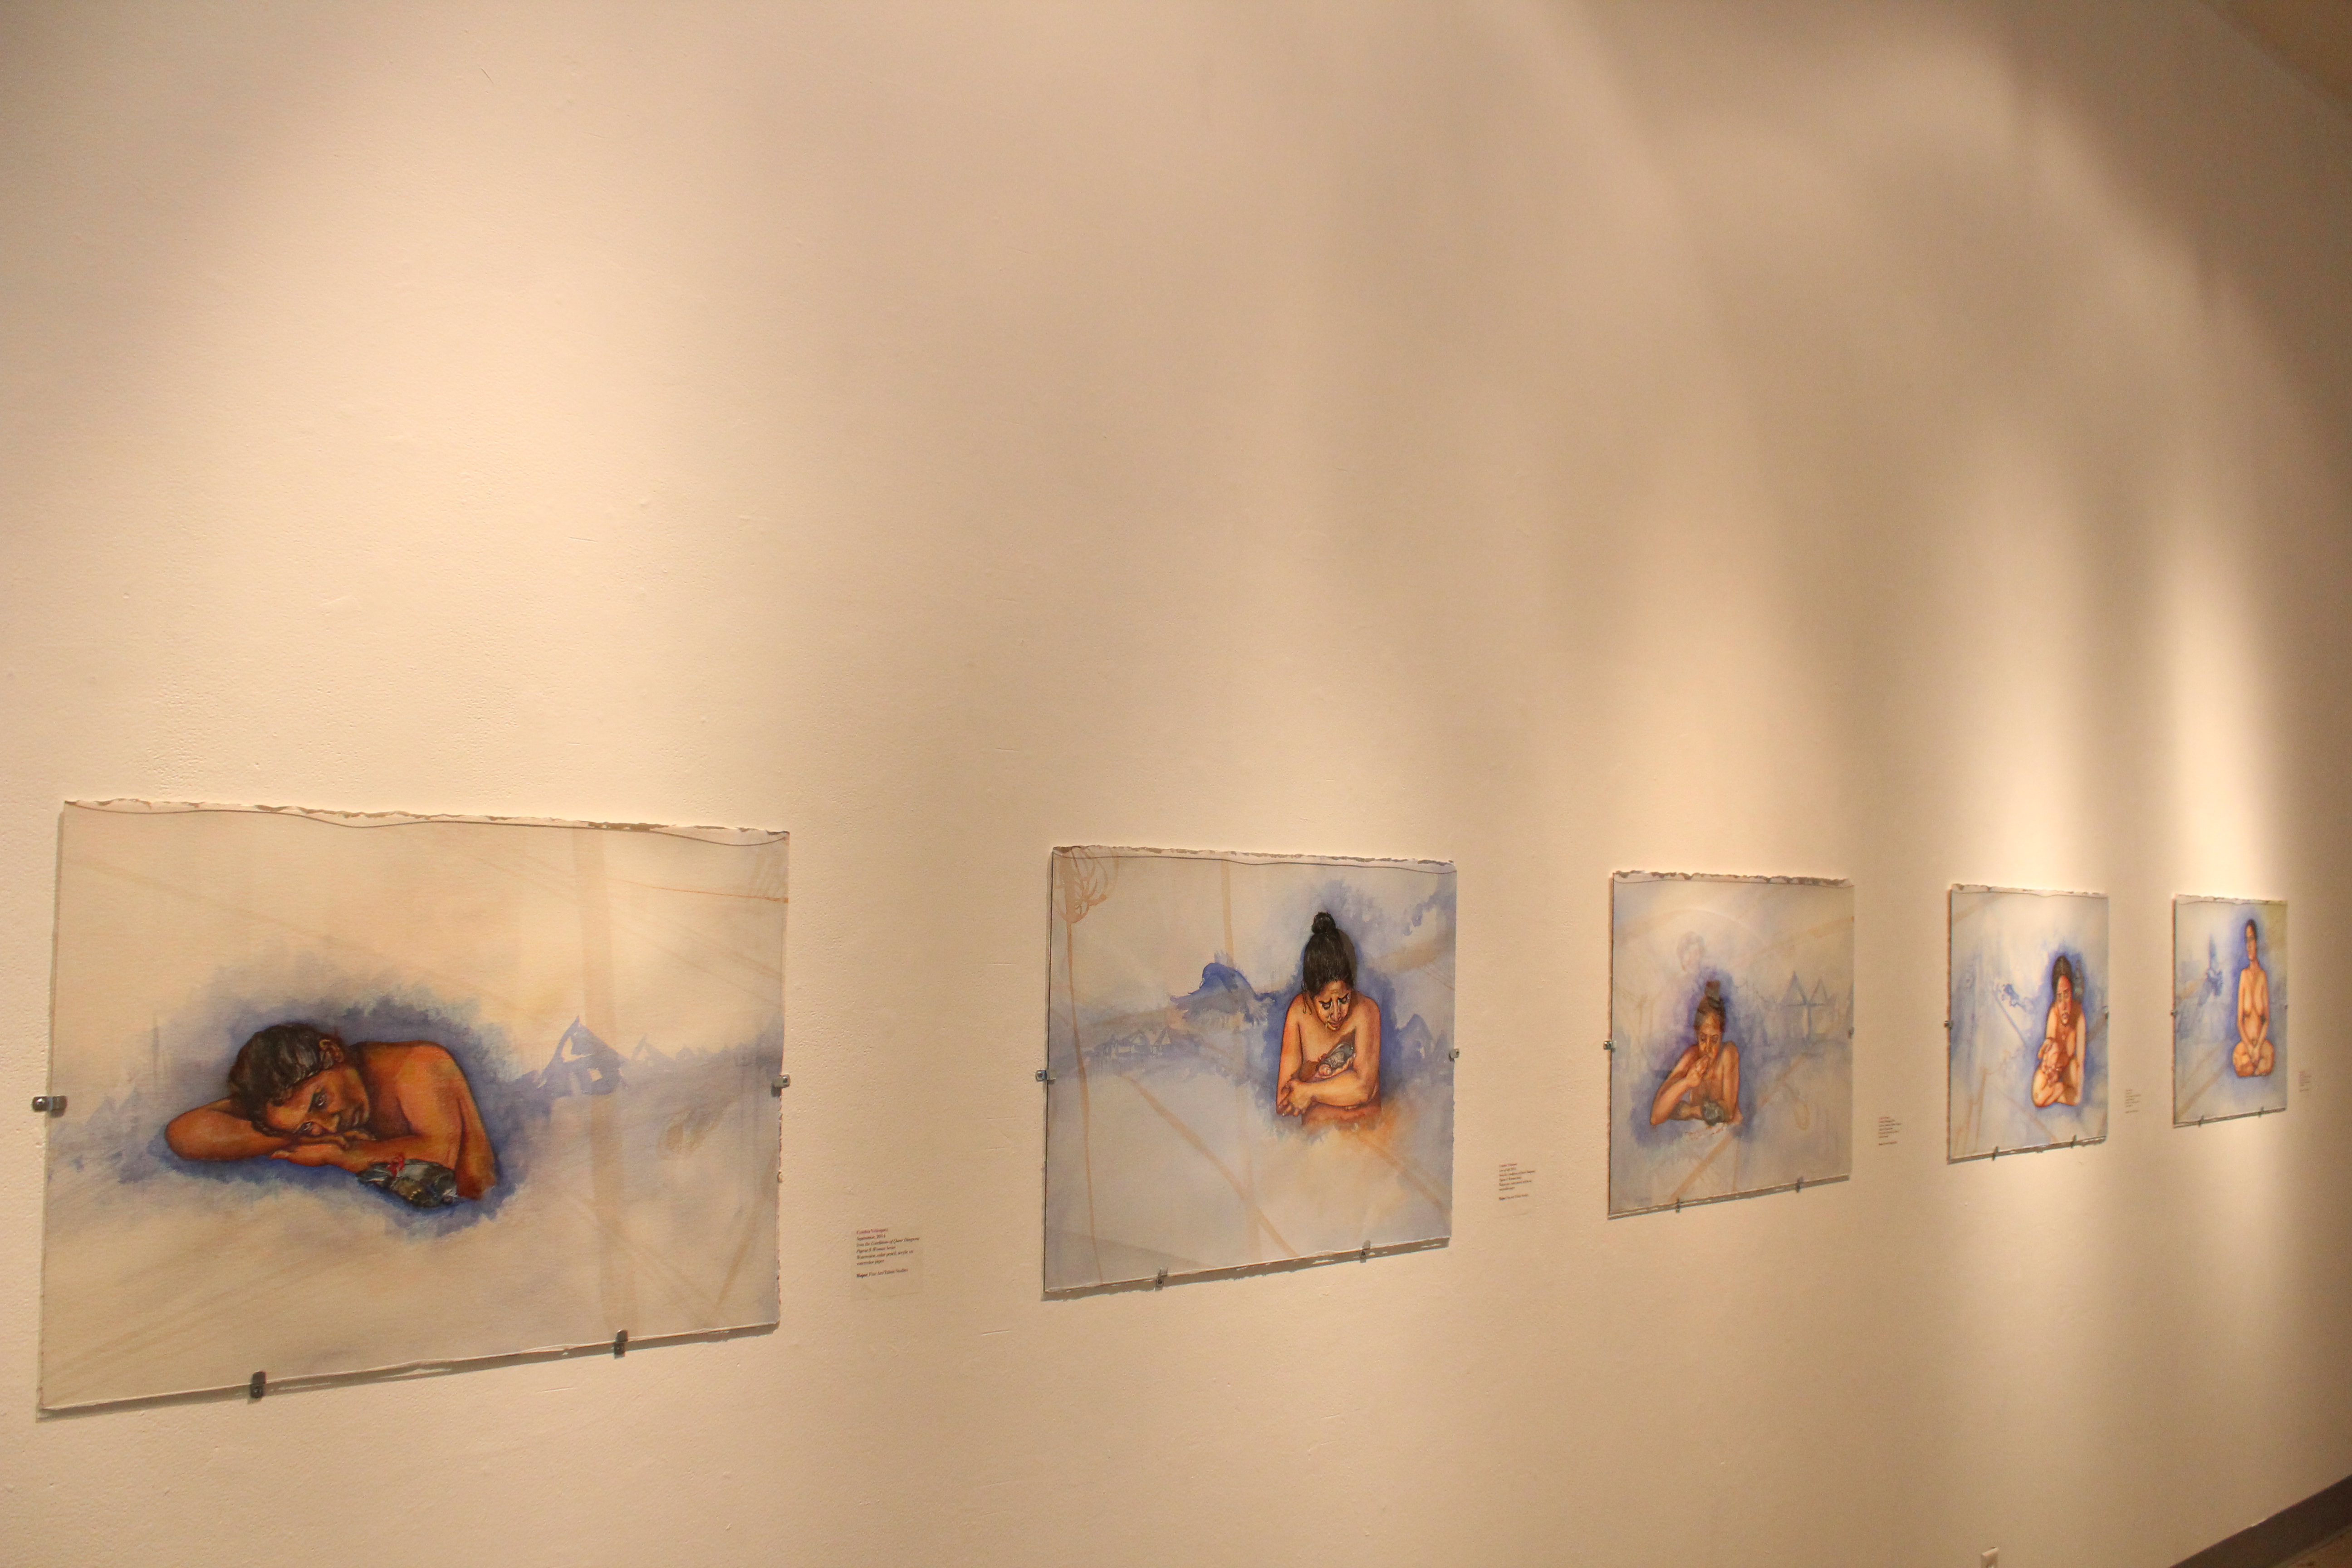 Installation View, Front East Gallery, Polykroma 2014 Exhibition, May. 19, 2014 to Jun. 15, 2014.